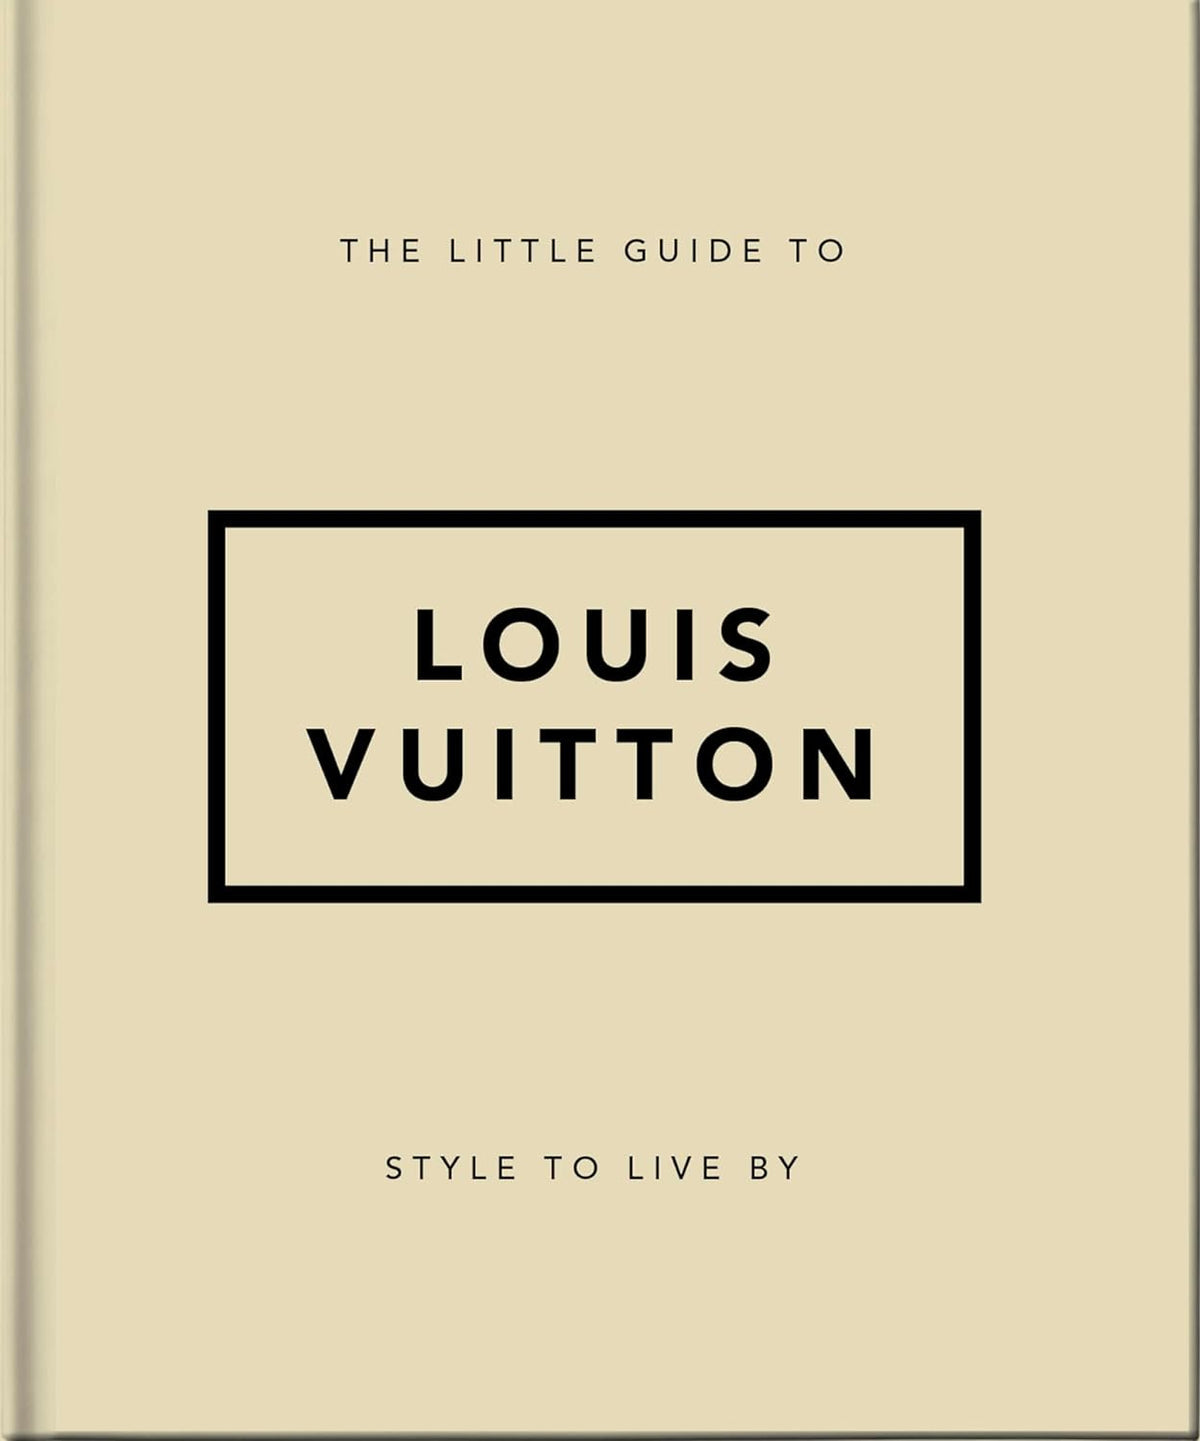 NEW MAGS The little guide to Louis Vuitton